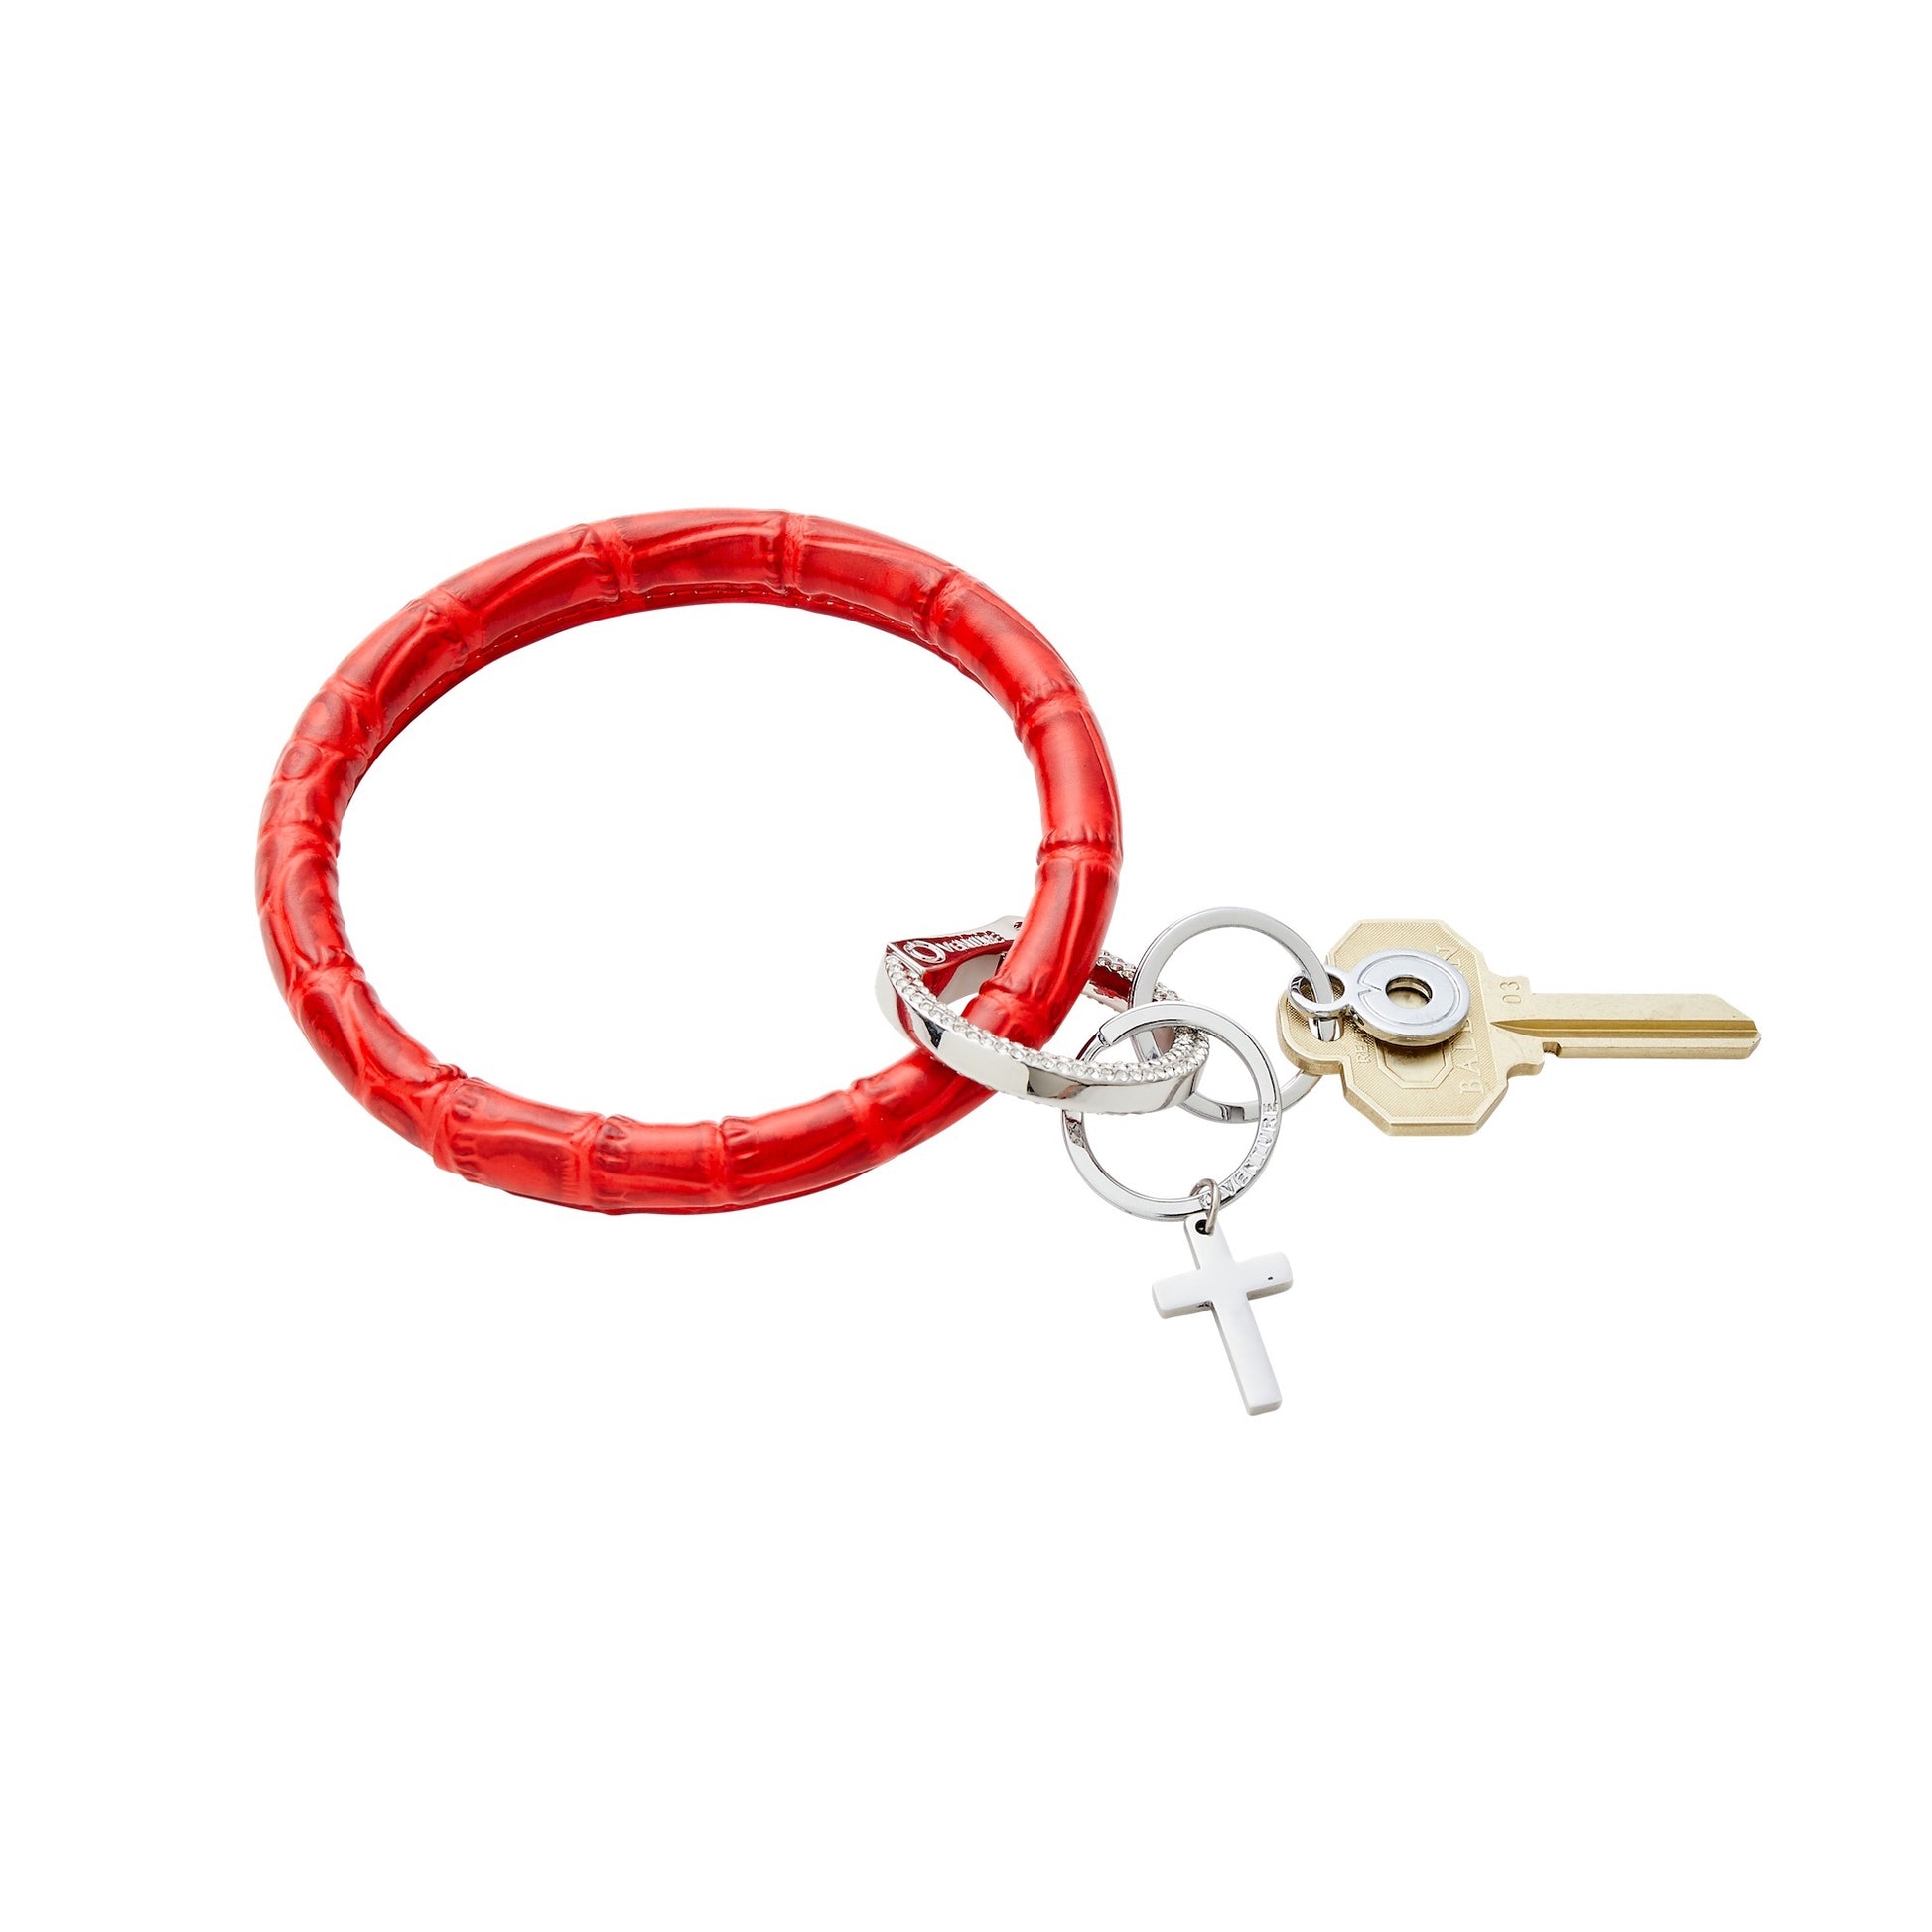 Cross charm in silver on a split ring. This can be attached to a Big O Key Ring. Featured is a red croc big o in embossed leather.